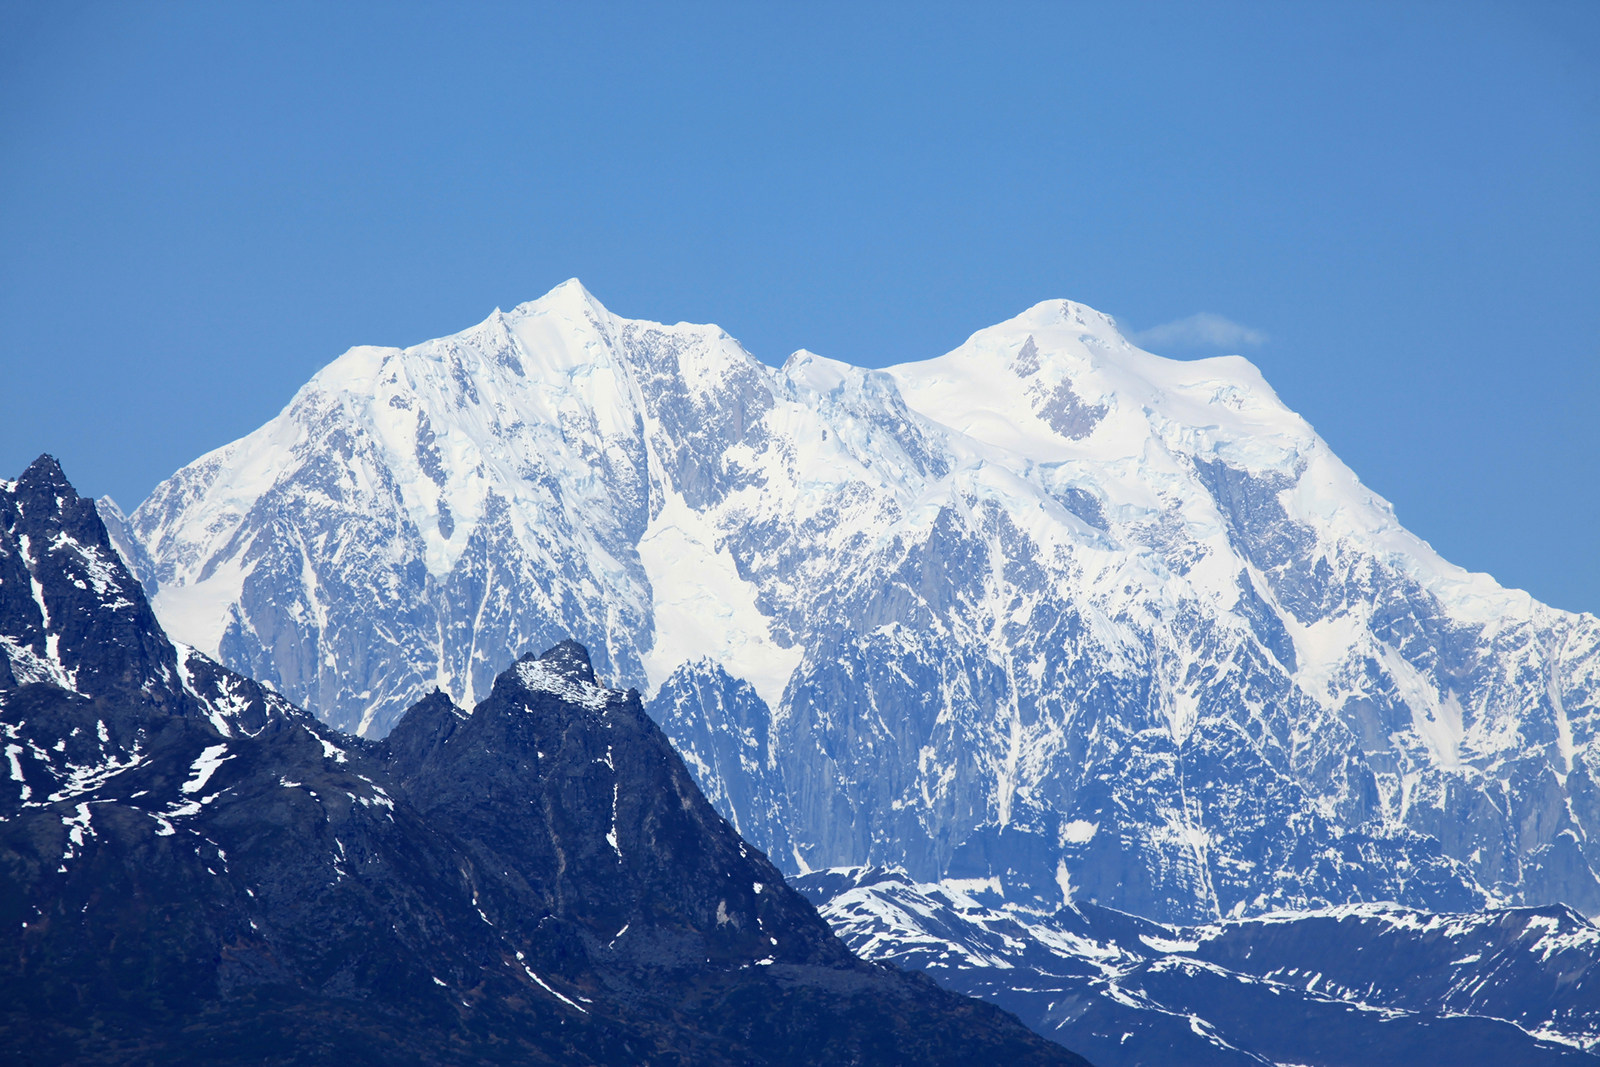 The summit of Denali in Alaska, North America’s tallest mountain, is 6,190 metres above sea level. Photo: Dreamstime/TNS